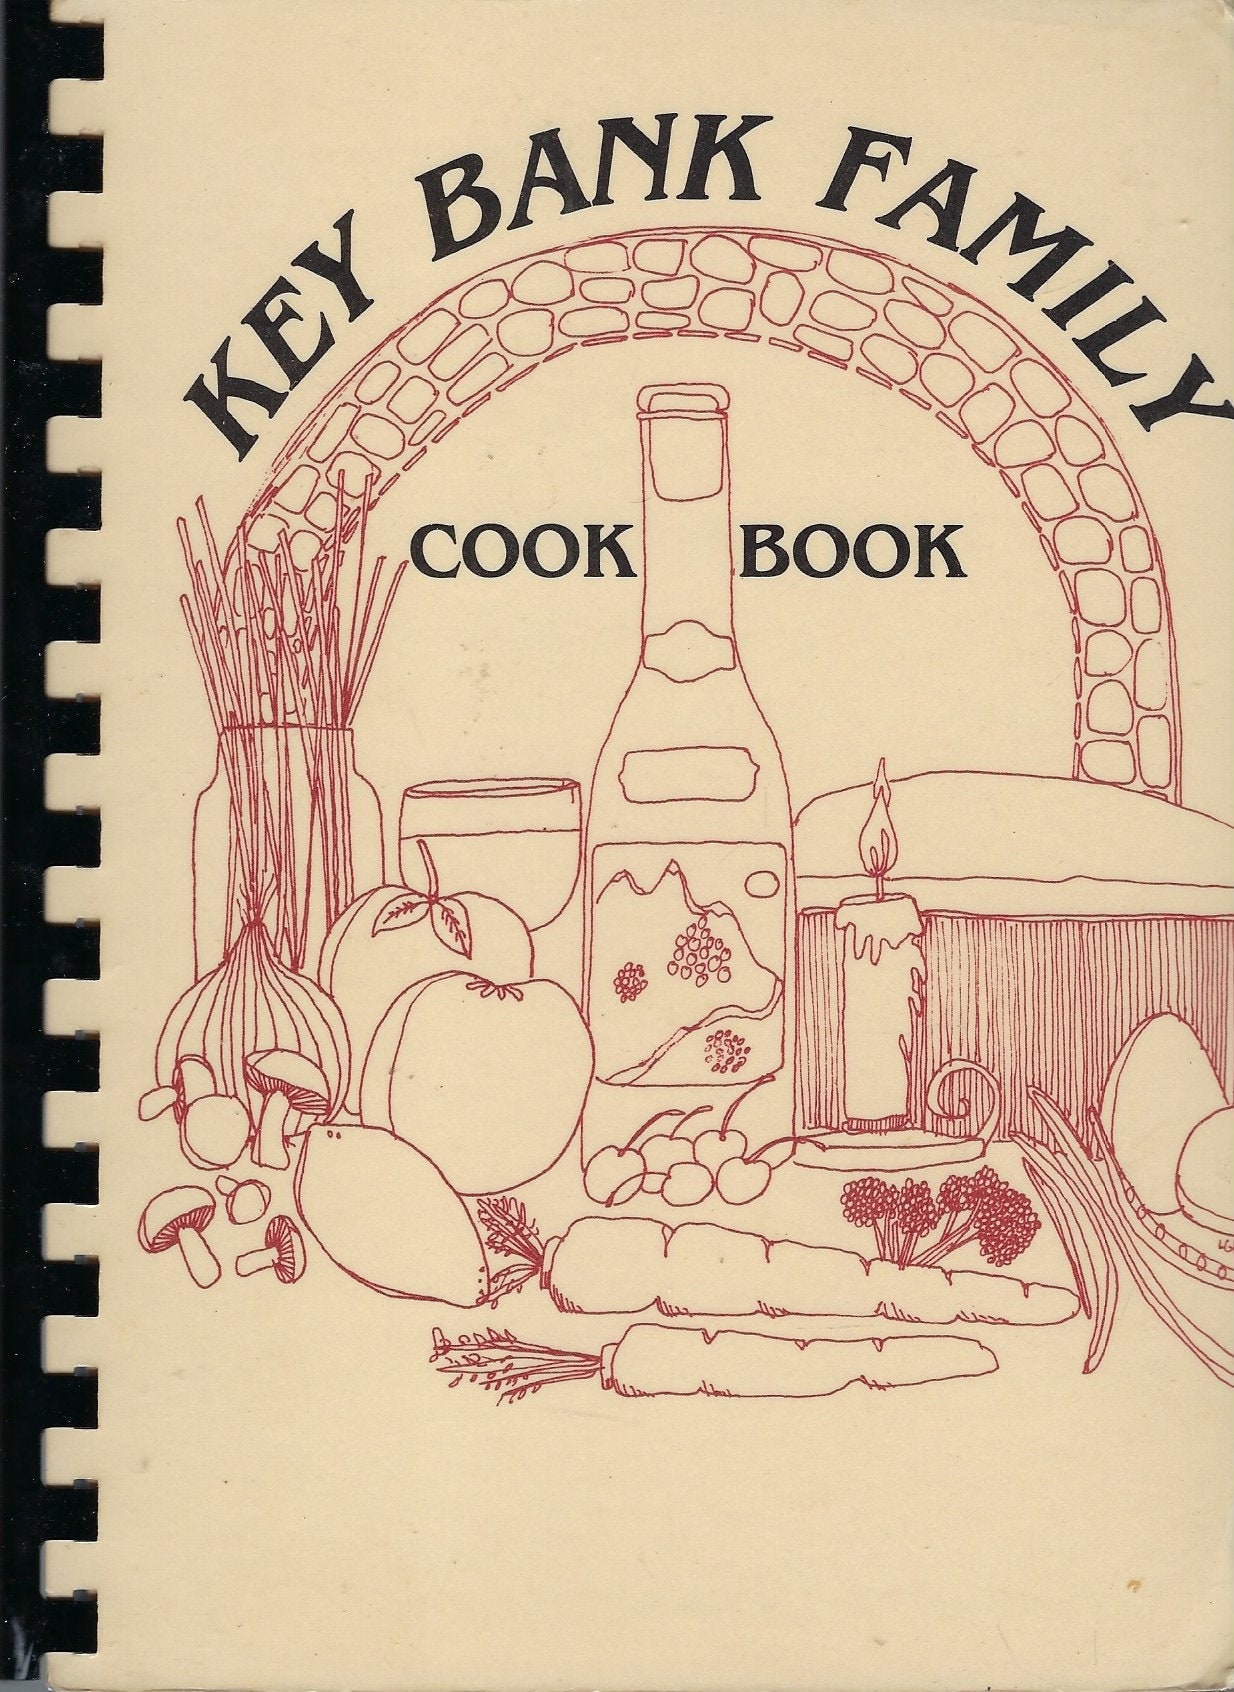 Albany New York Vintage Key Bank Family Cookbook Ny Community Favorite Recipes Collectible Souvenir Spiral Bound Rare Local Cook Book